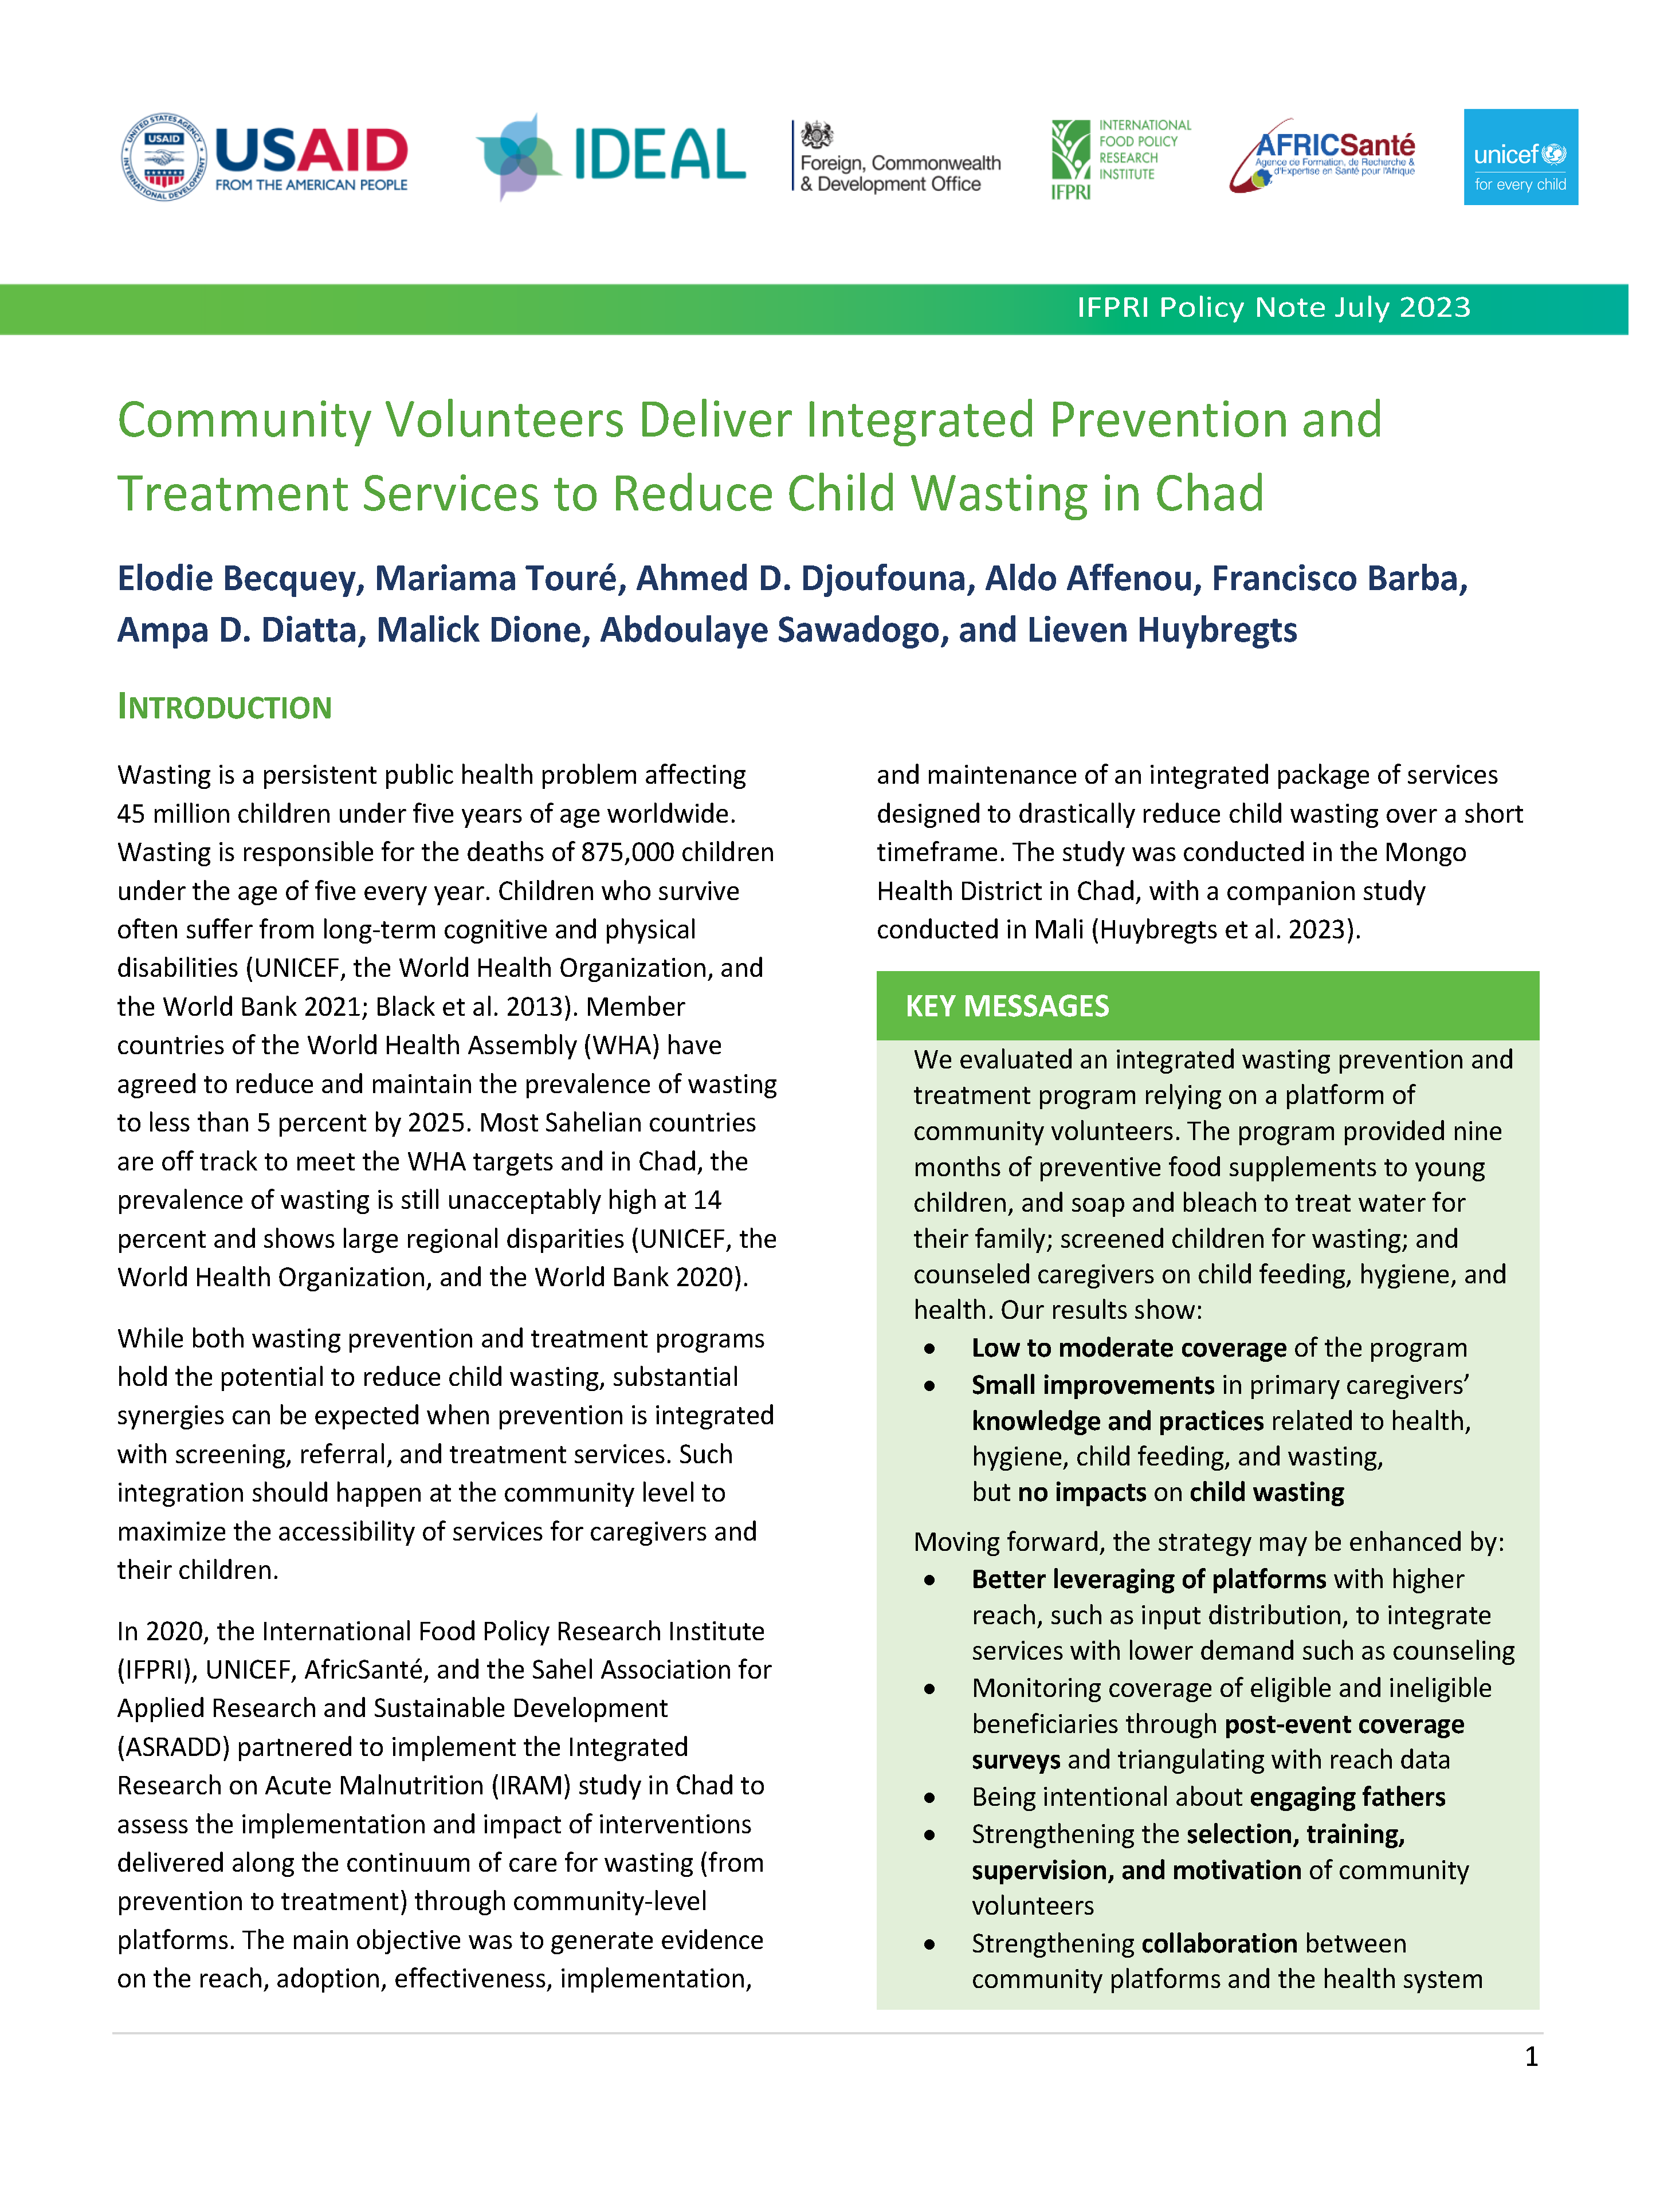 Cover page for Community Volunteers Deliver Integrated Prevention and Treatment Services to Reduce Child Wasting in Chad